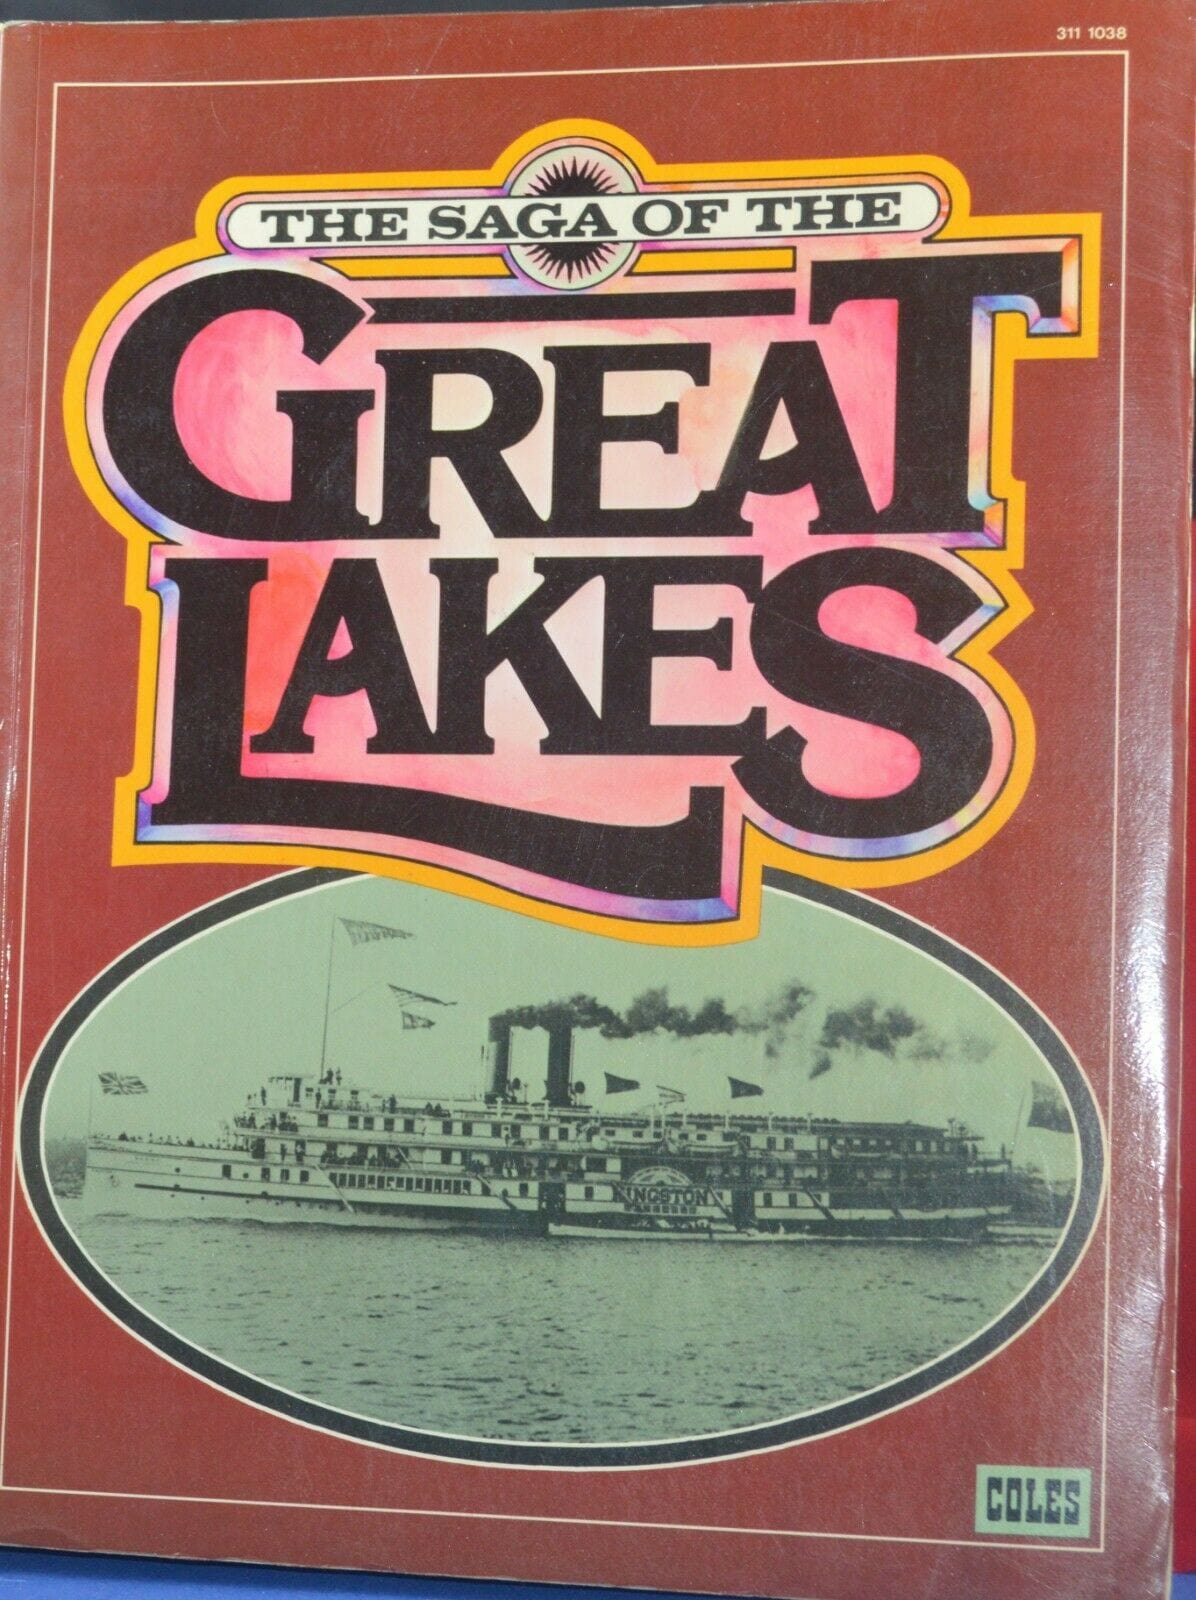 BOOK THE SAGA OF THE GREAT LAKES(PREVIOUSLY OWNED)GOOD CONDITION - TMD167207